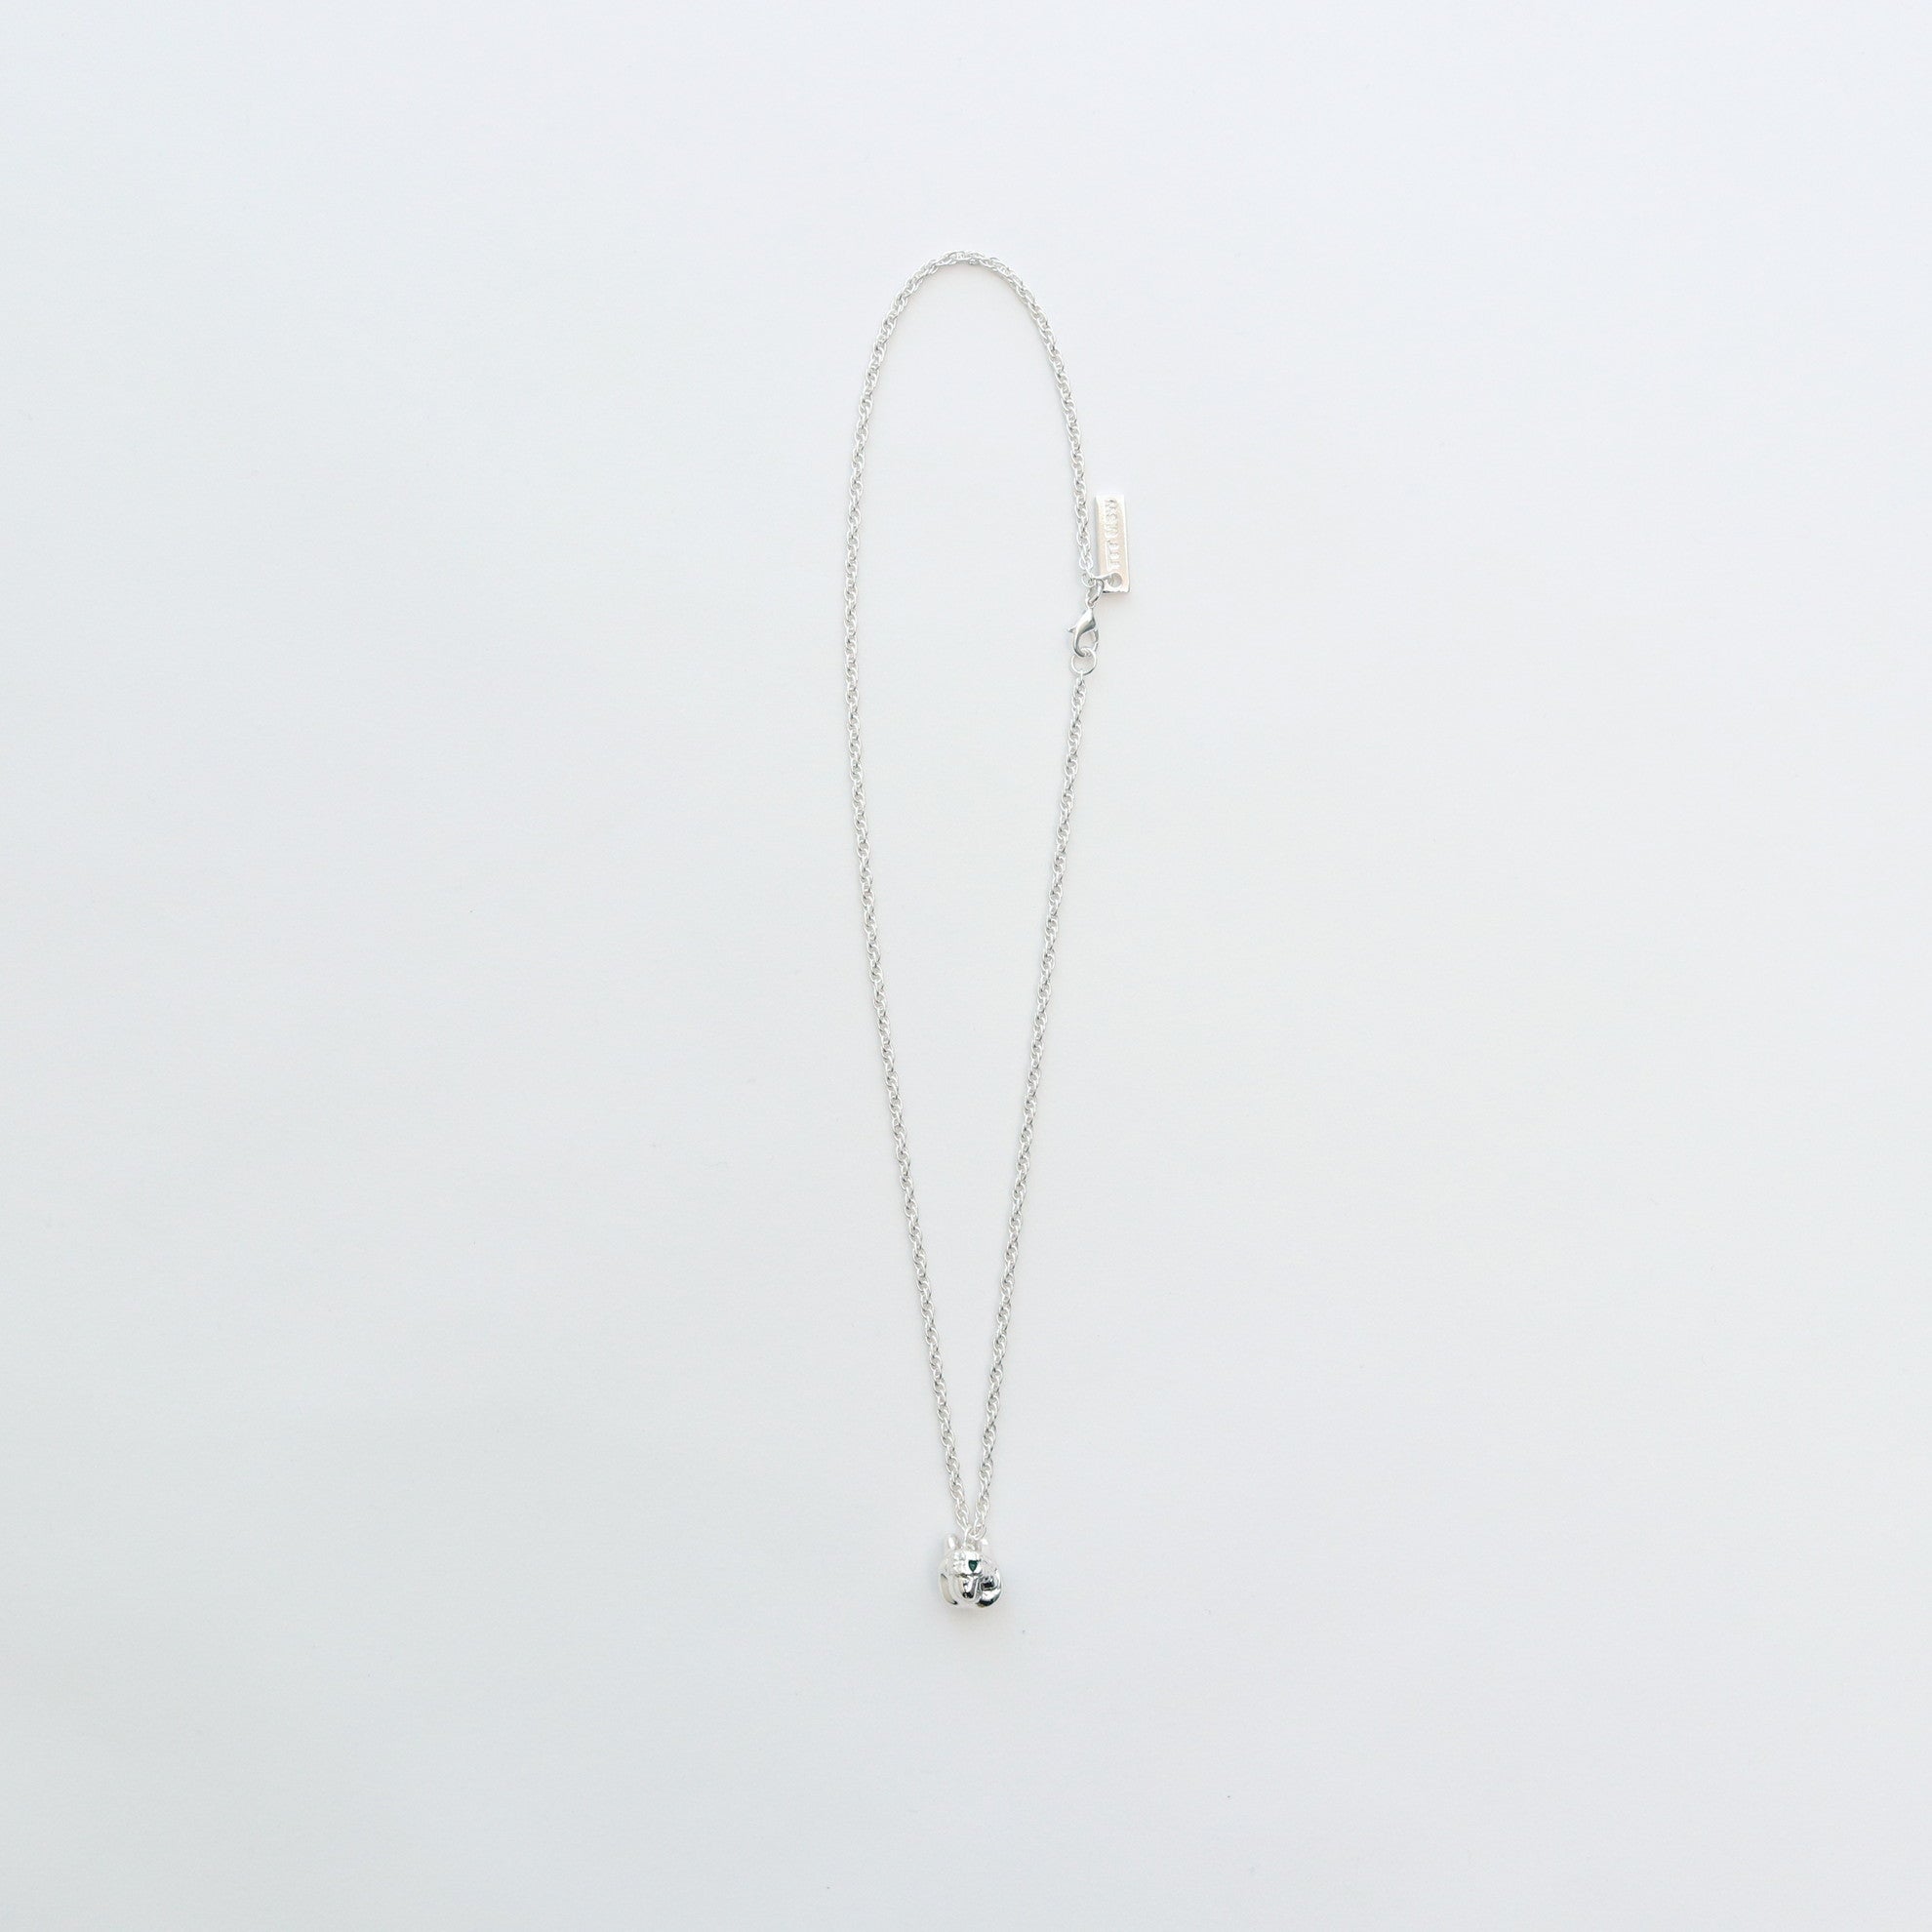 TTT MSW（ティー）Silver Necklace シルバー ネックレス